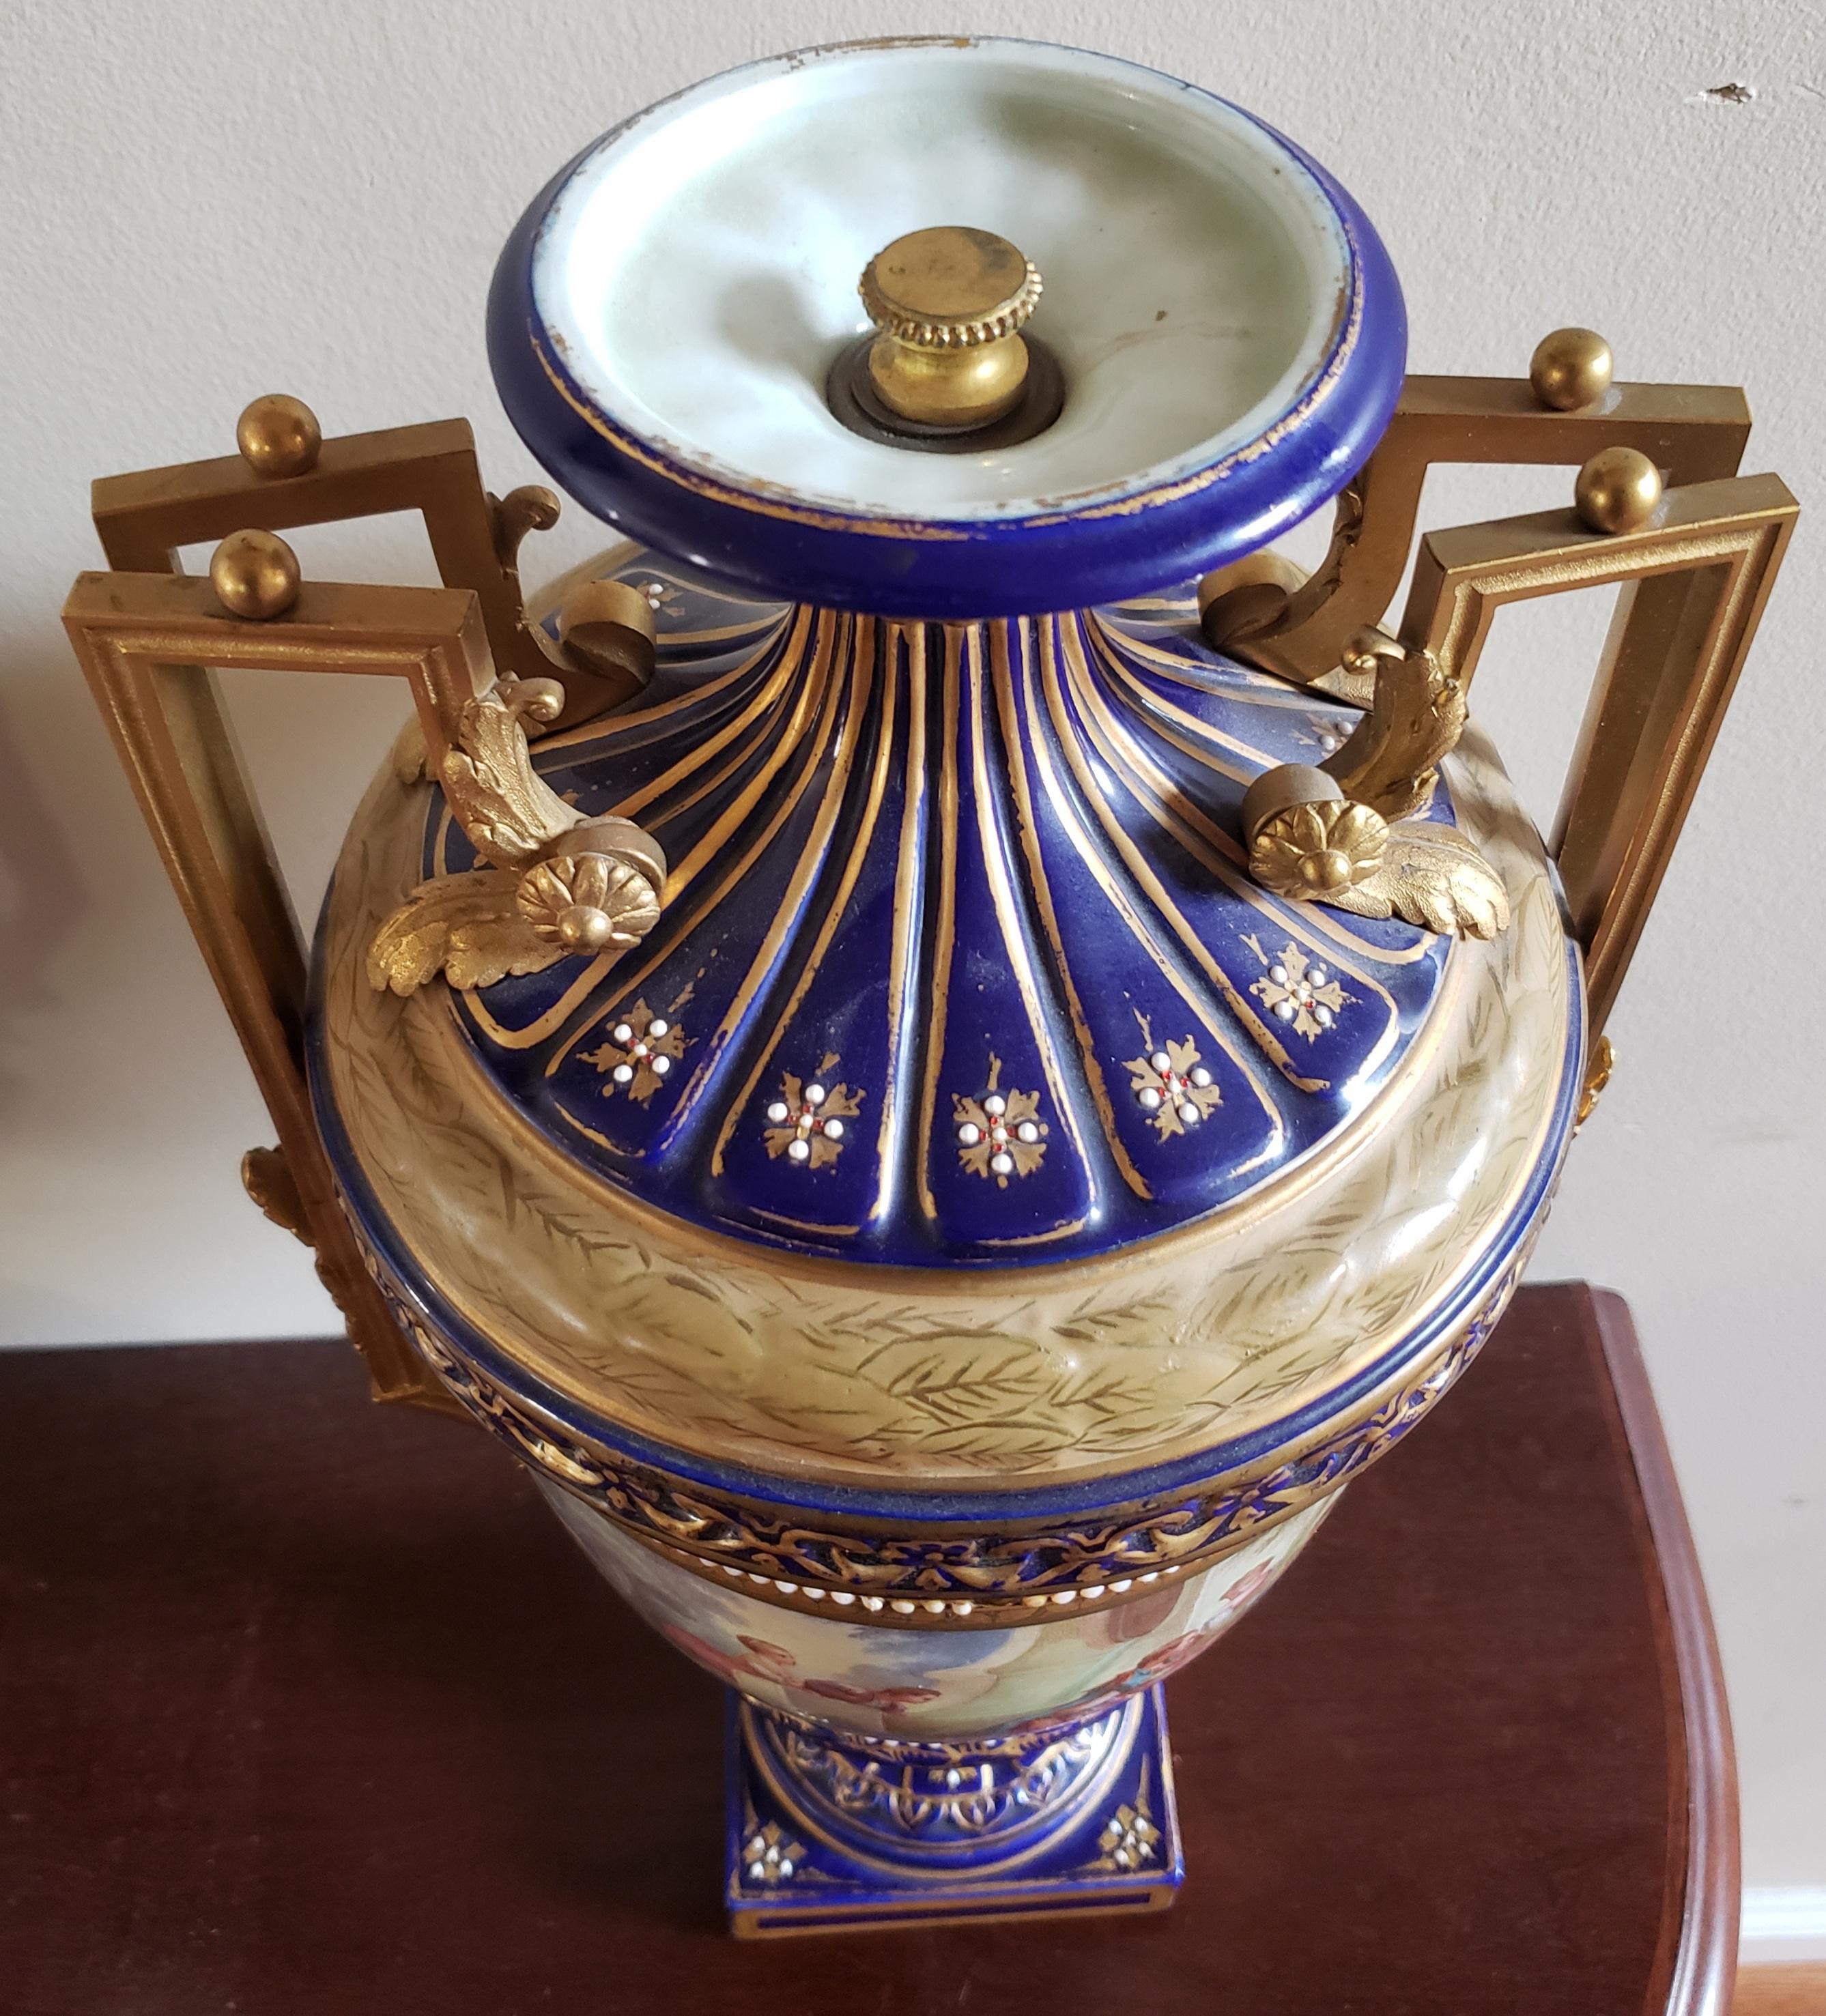 Metal Pair of 19th Century Sevres Porcelain Hand Painted Cobalt & Gilt Decorated Urns For Sale